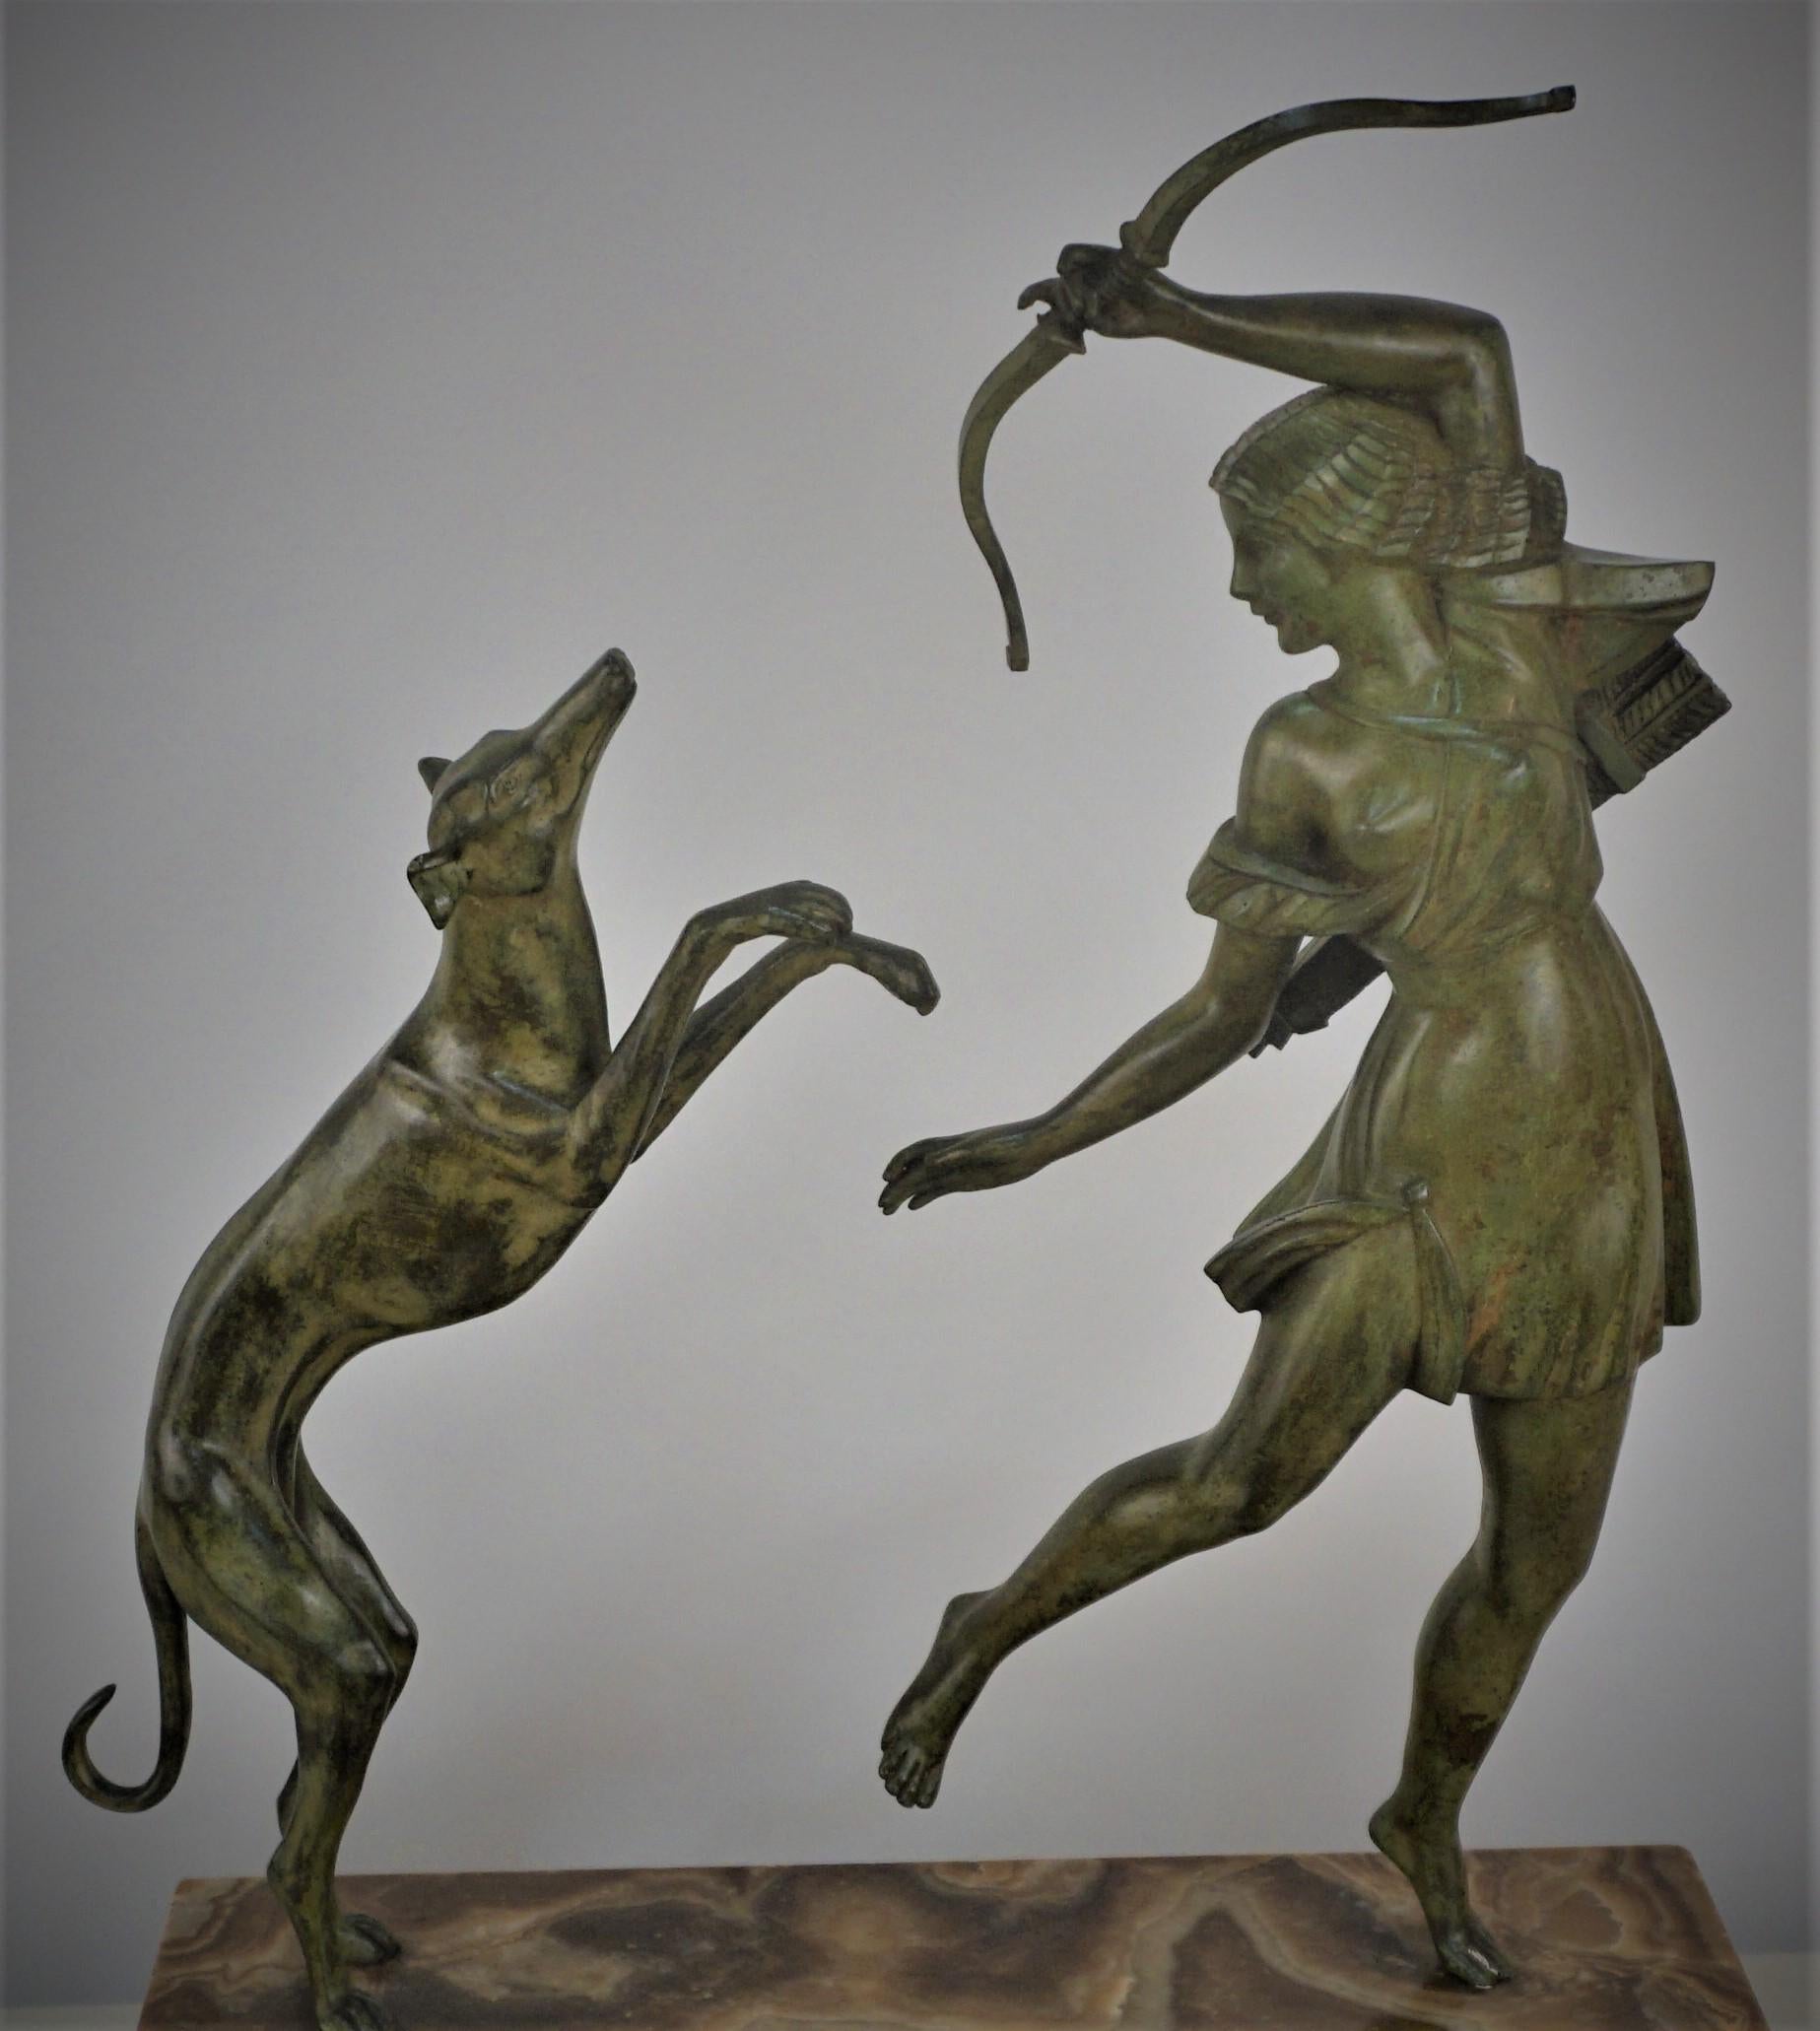 Art Deco sculpture of Diane the Hunter with Dog in green, brown patinated bronze standing over textured brown onyx.